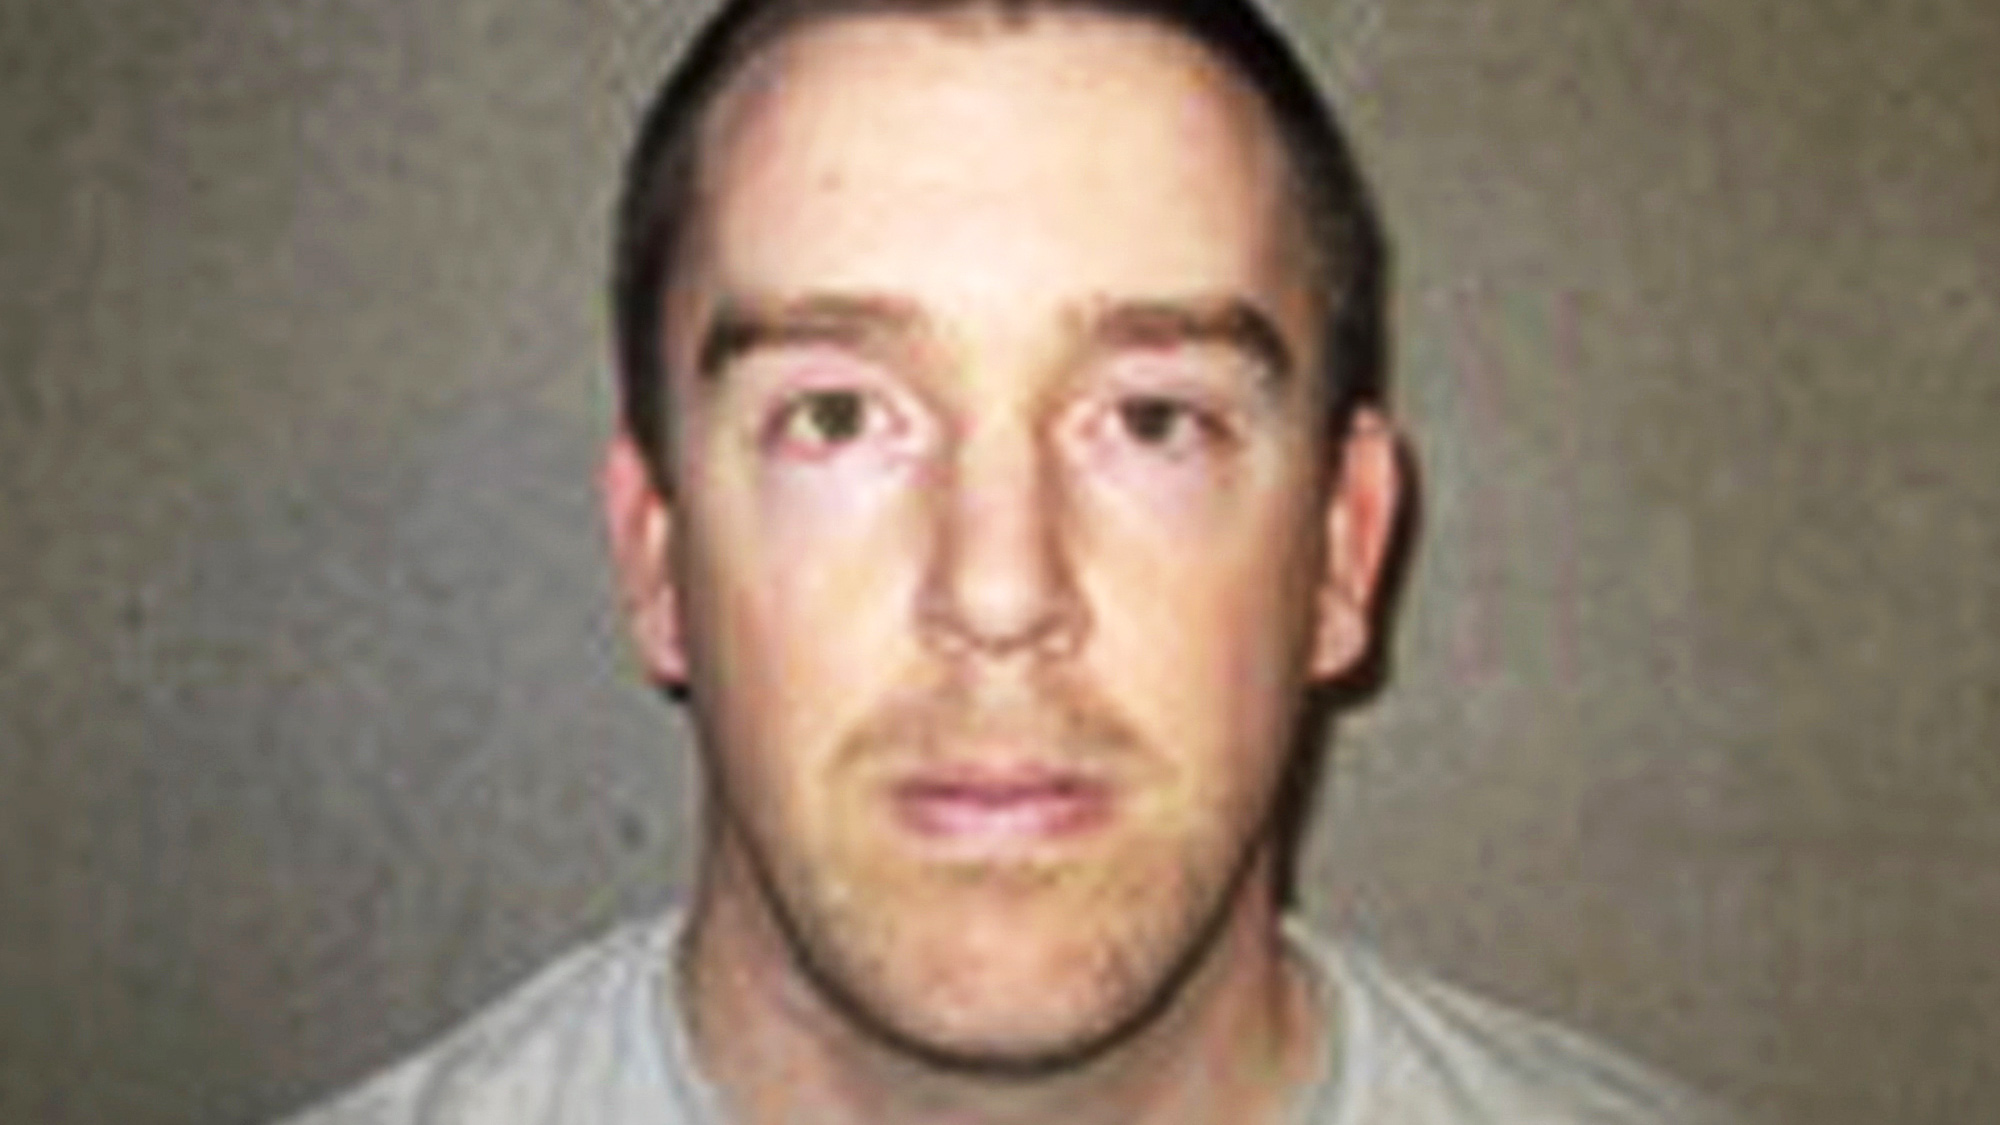 An Oklahoma Department of Corrections photo of Shaun Bosse.